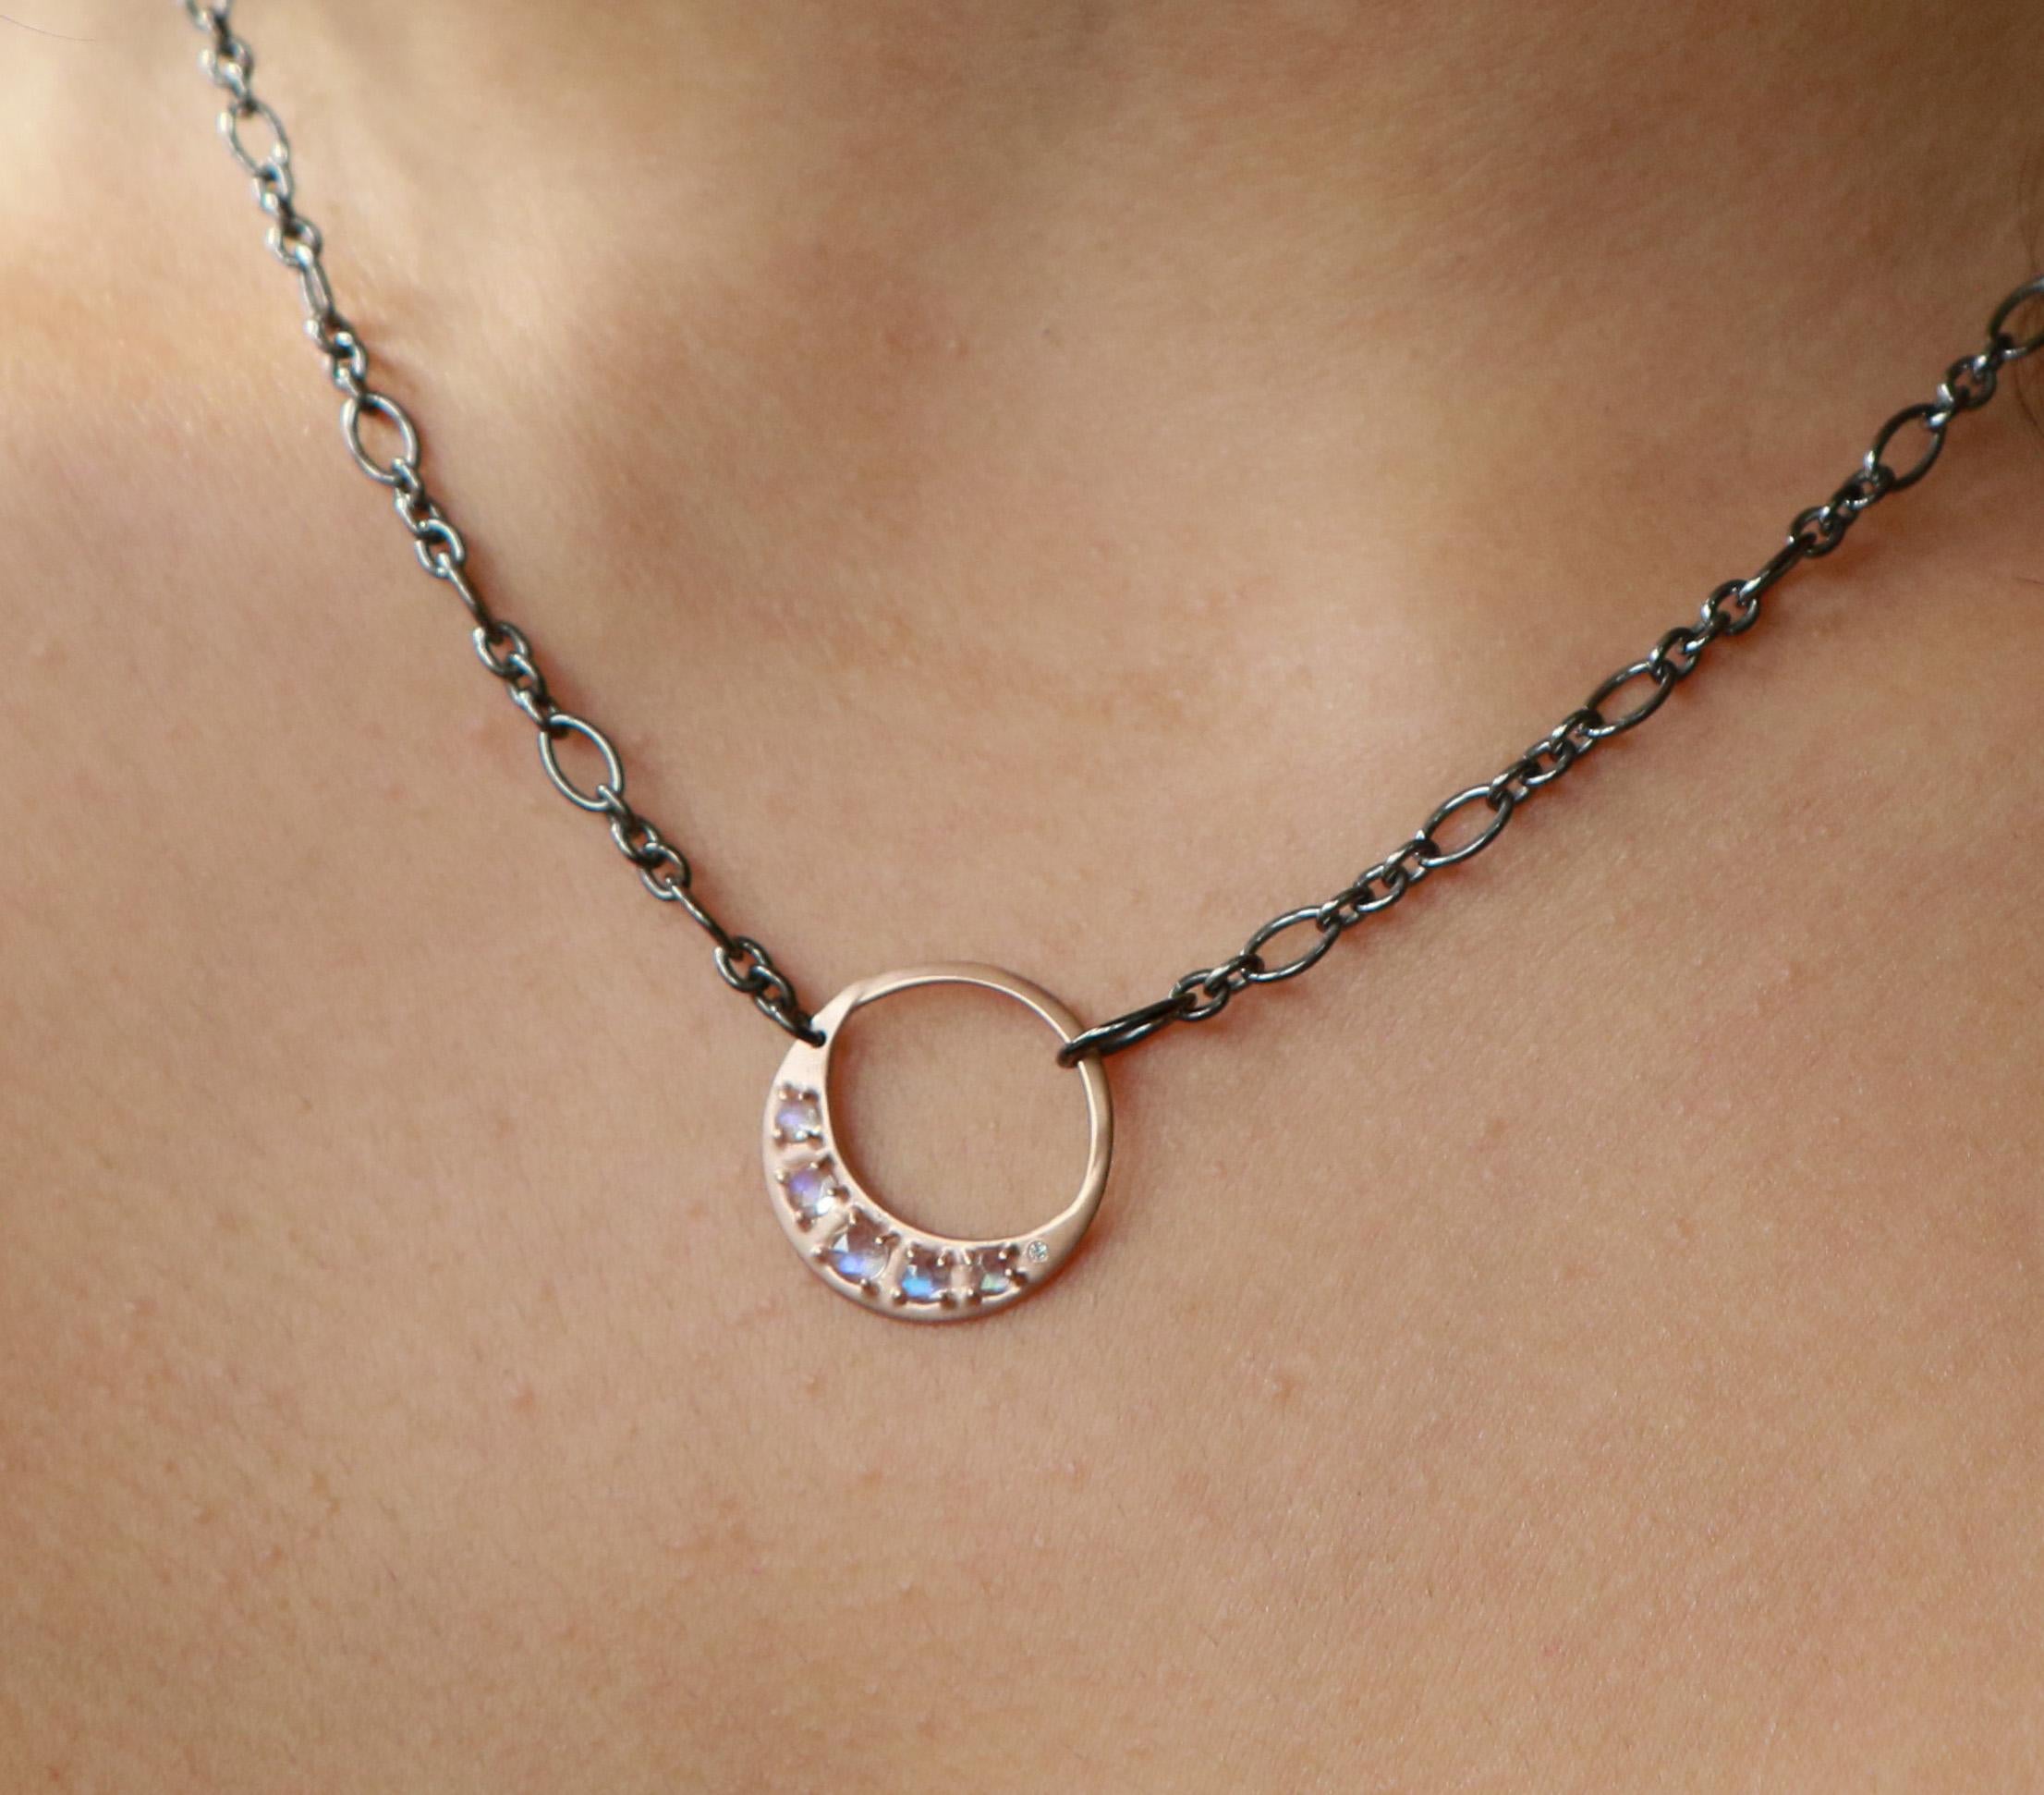 Rose Gold Pendant Moon Necklace with Rose Cut Blue Moonstone and Diamond Accent For Sale 2